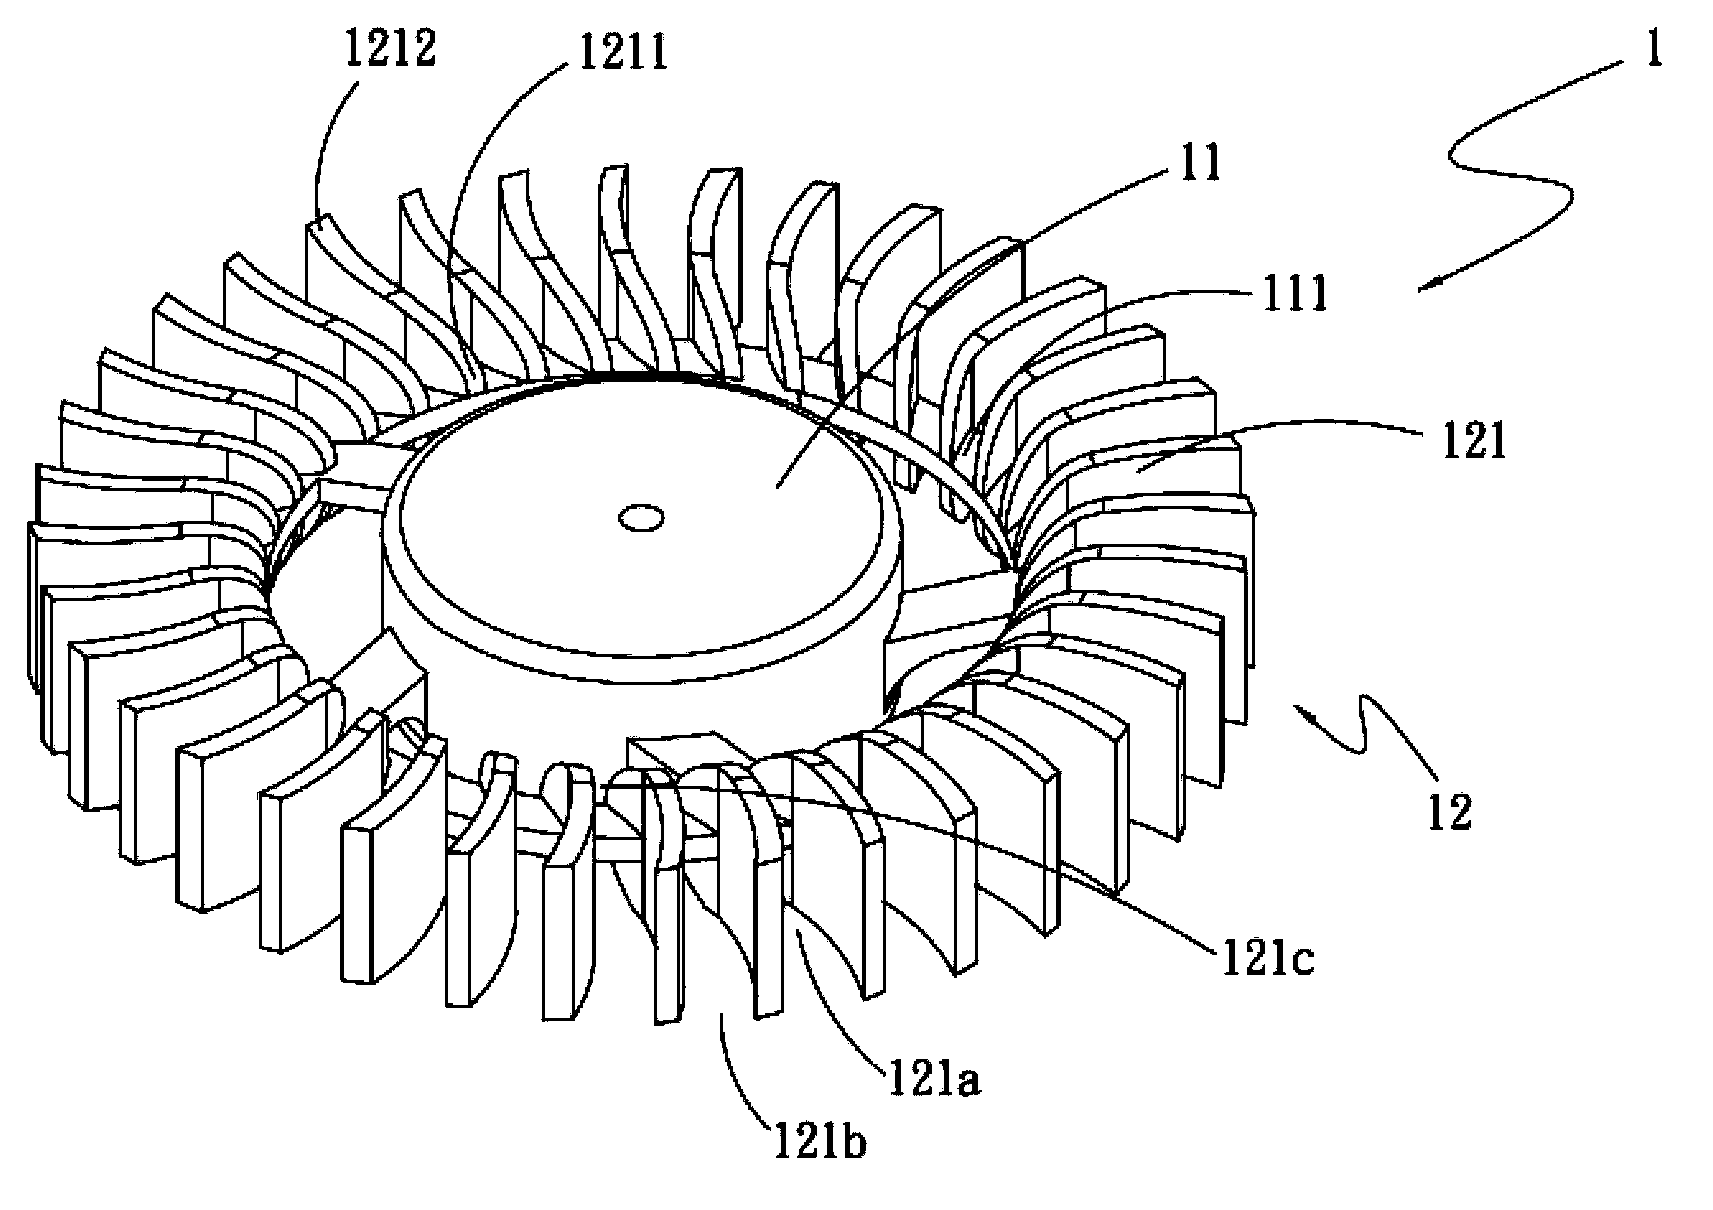 Centrifugal fan blade structure